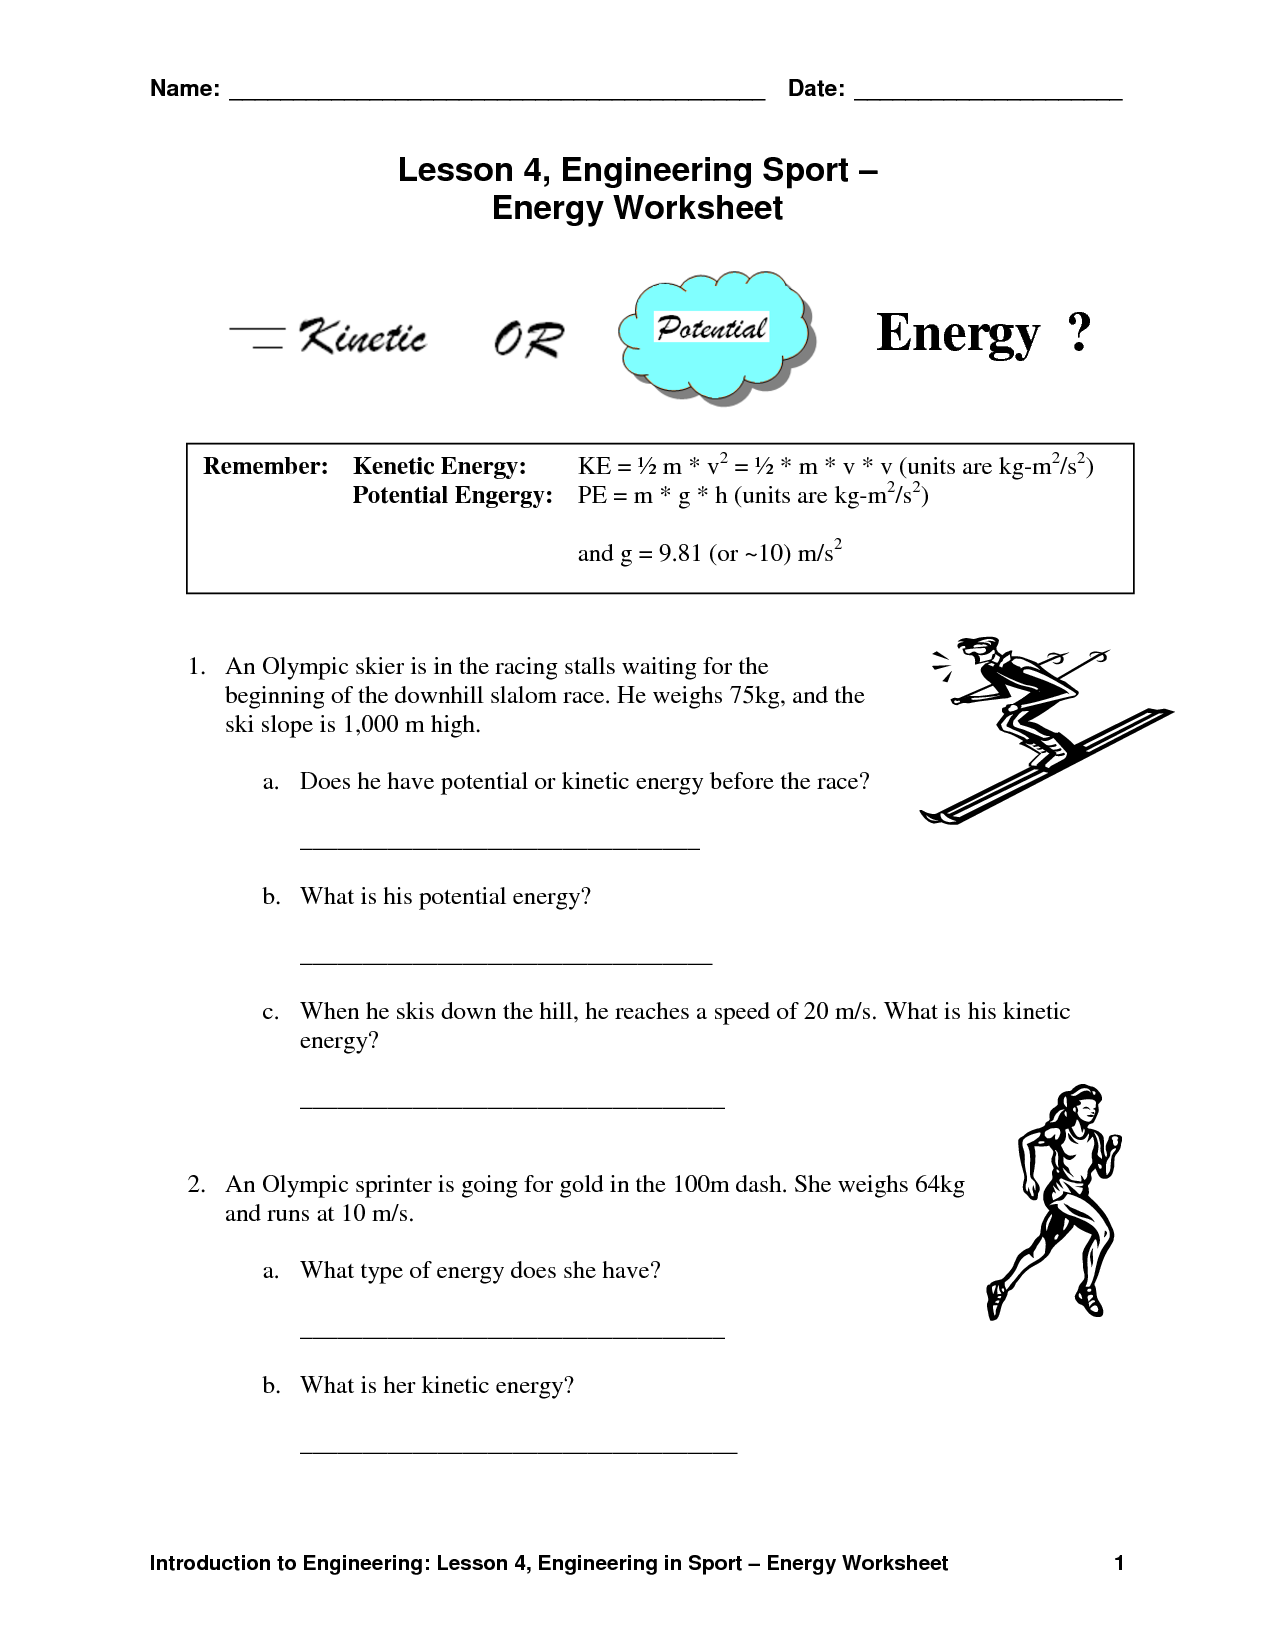 Potential and Kinetic Energy Worksheets for Kids Image